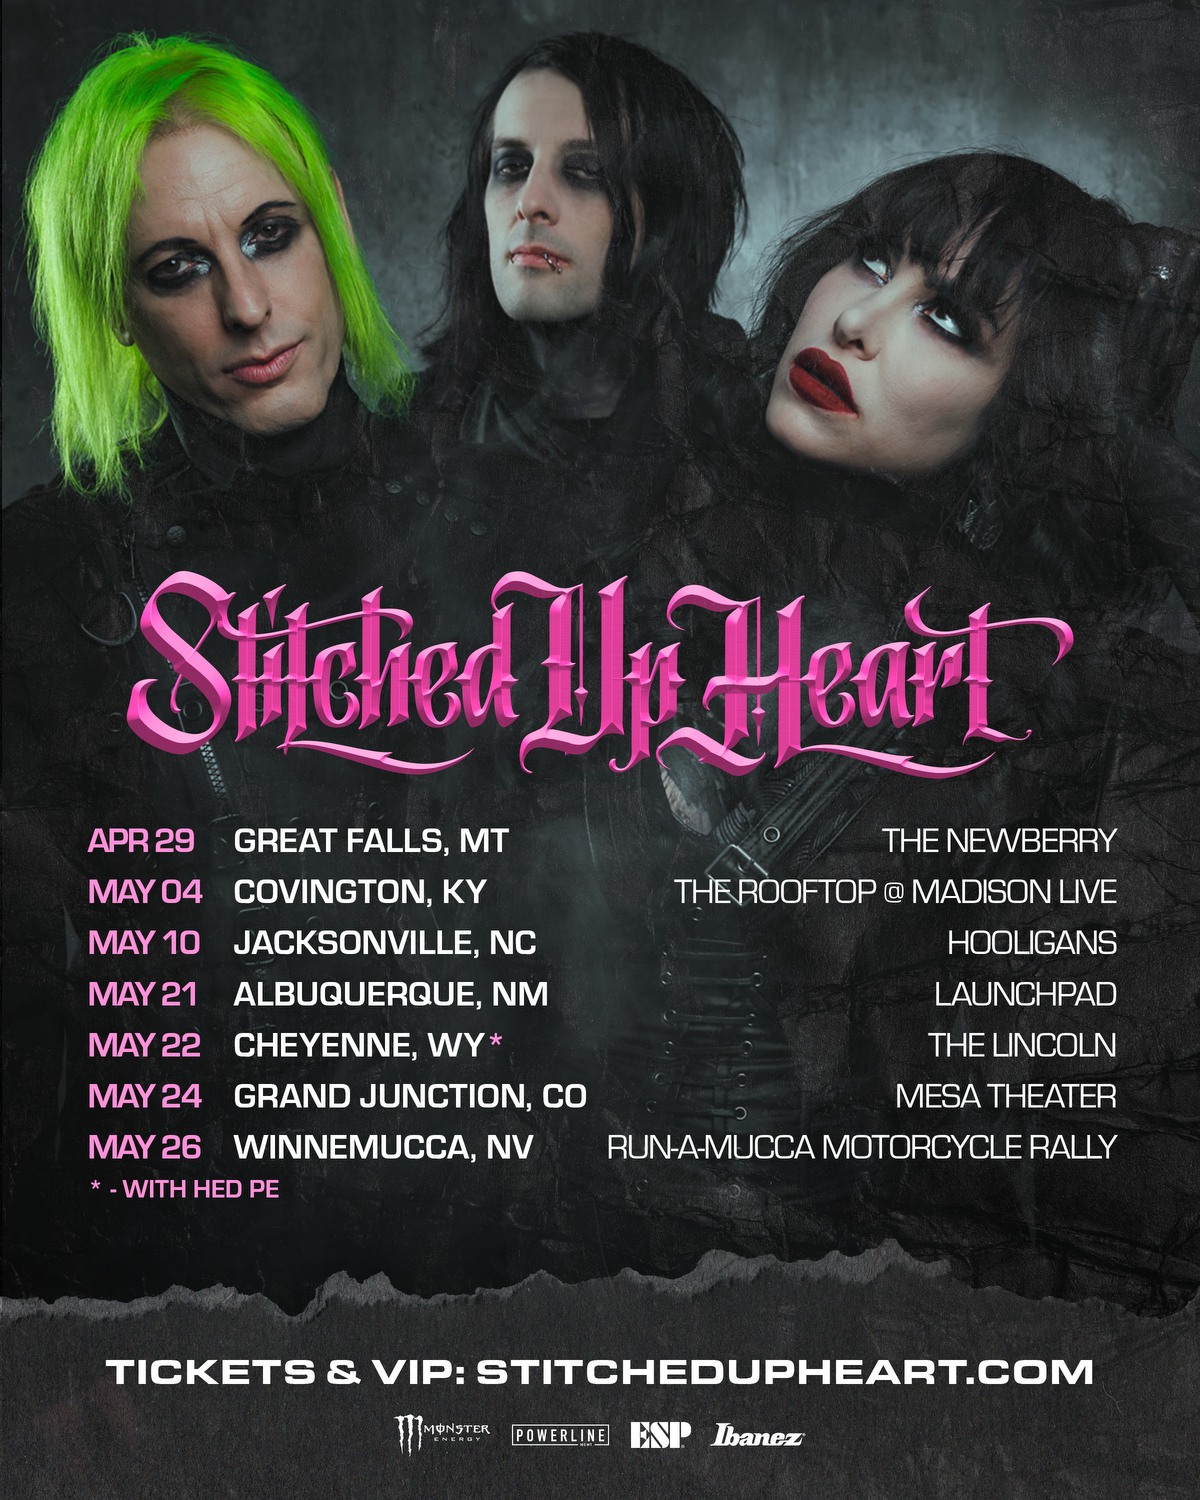 VIP - Stitched Up Heart - On The Prowl Tour